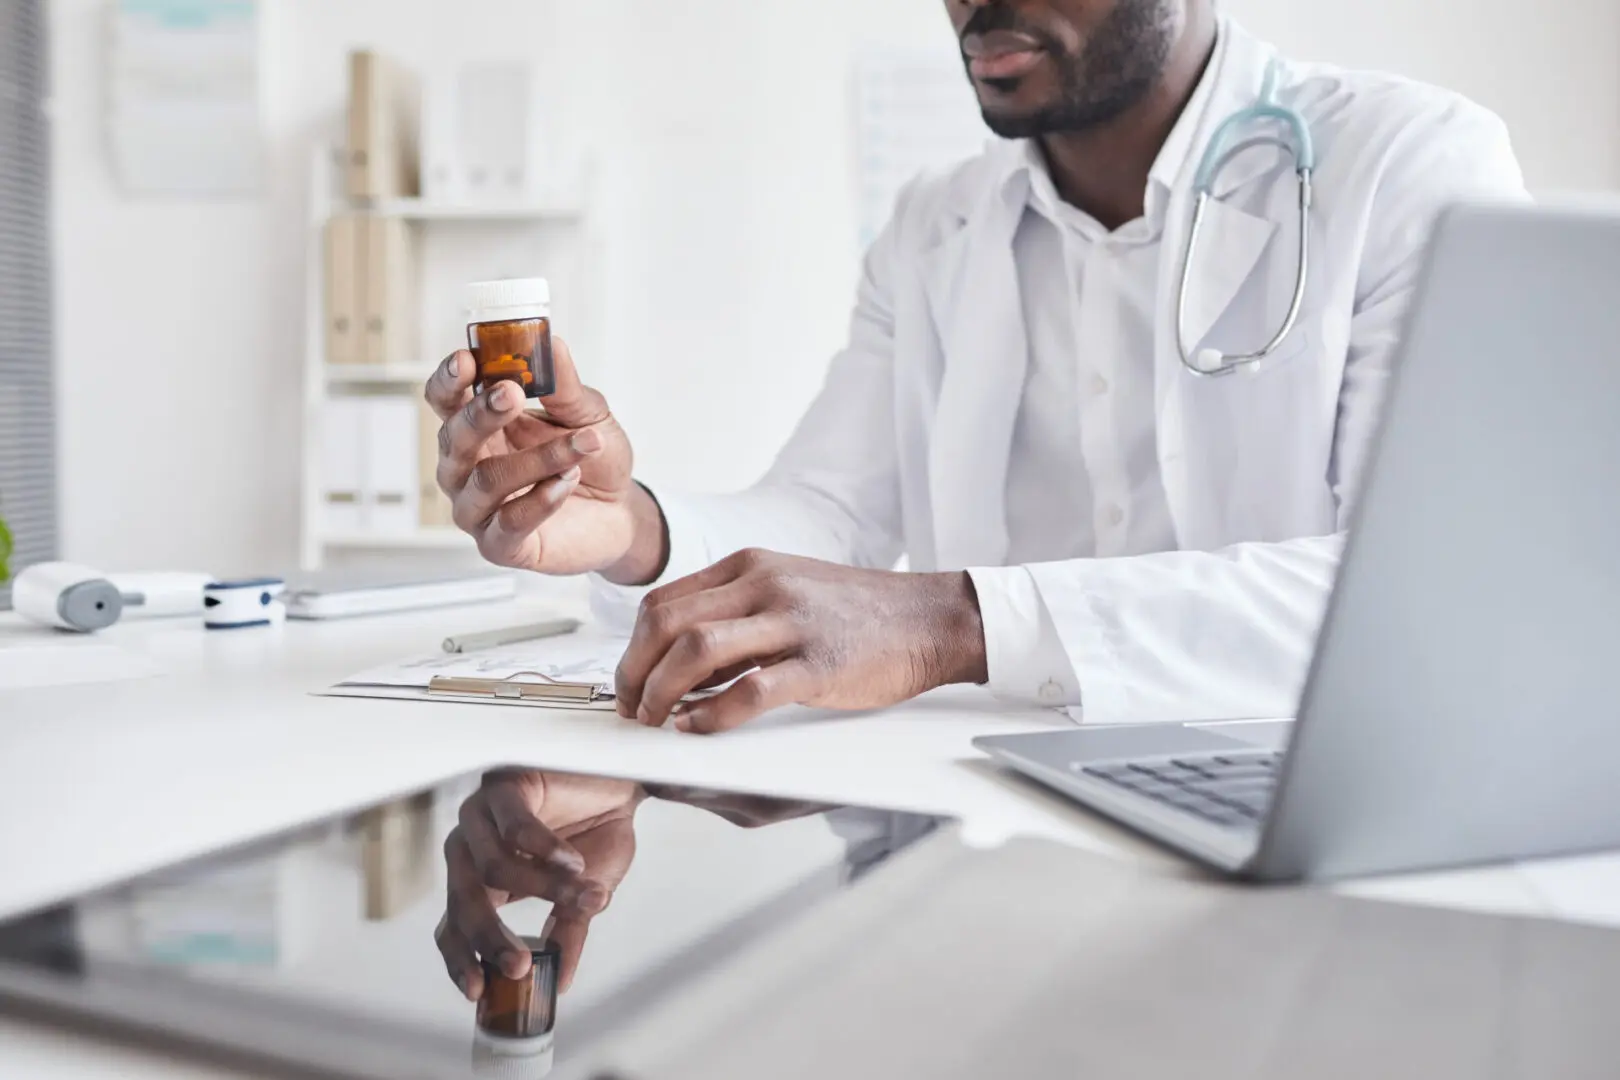 A doctor is holding a pill bottle while sitting at his desk.